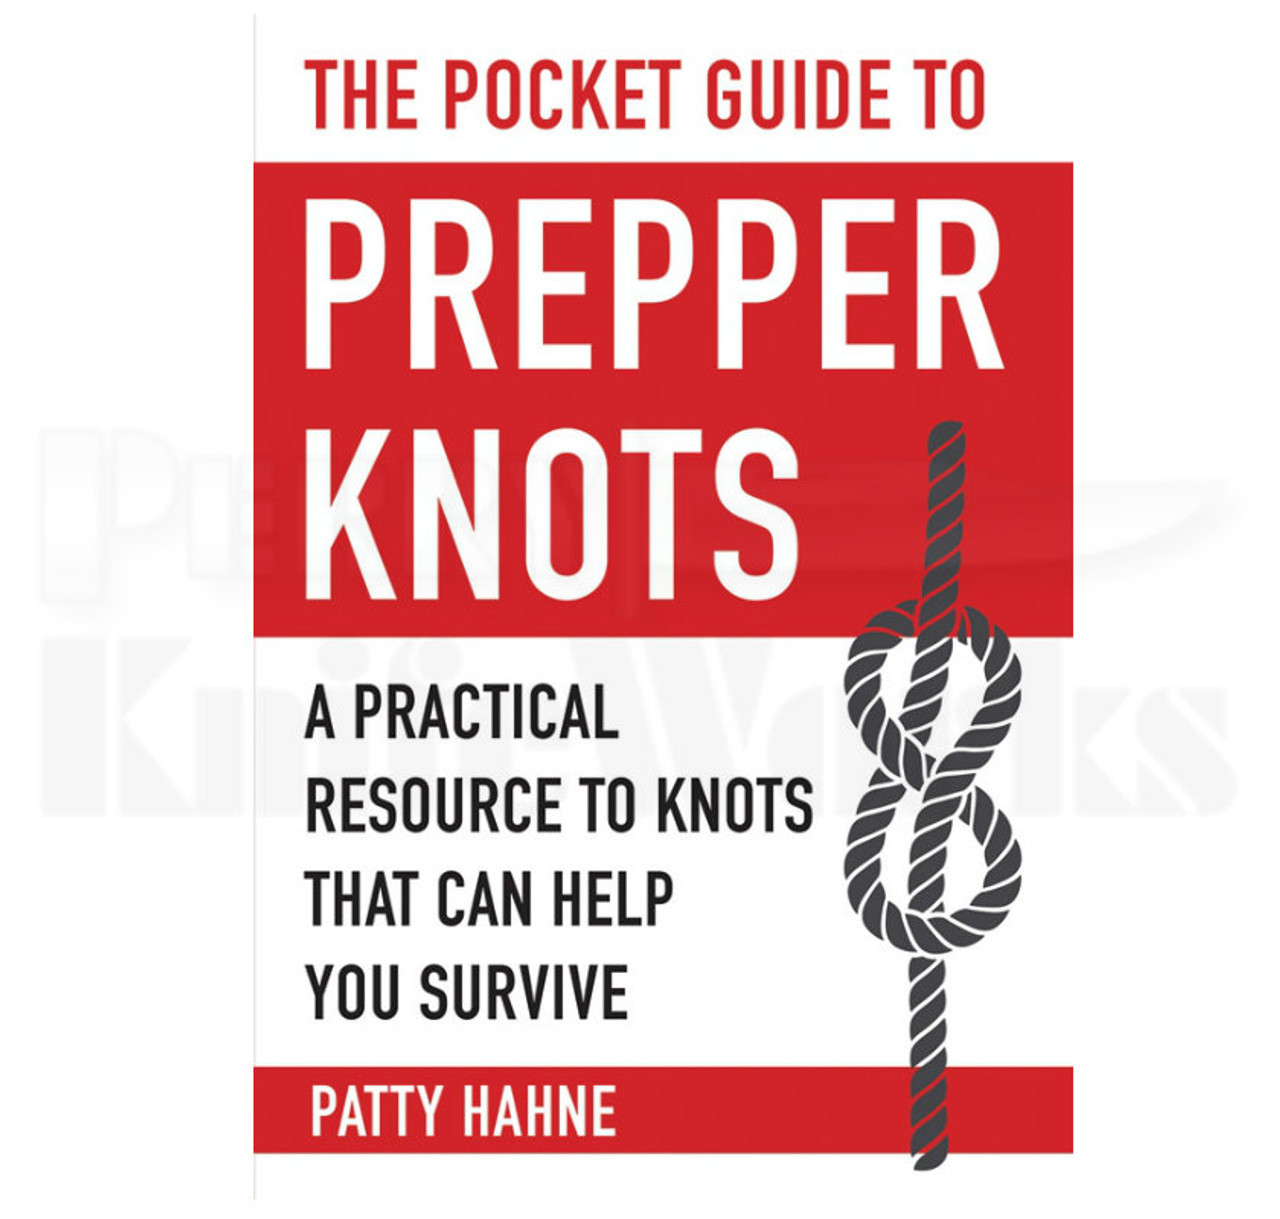 Pocket Guide to Prepper Knots By Patty Hahne 155 Pages